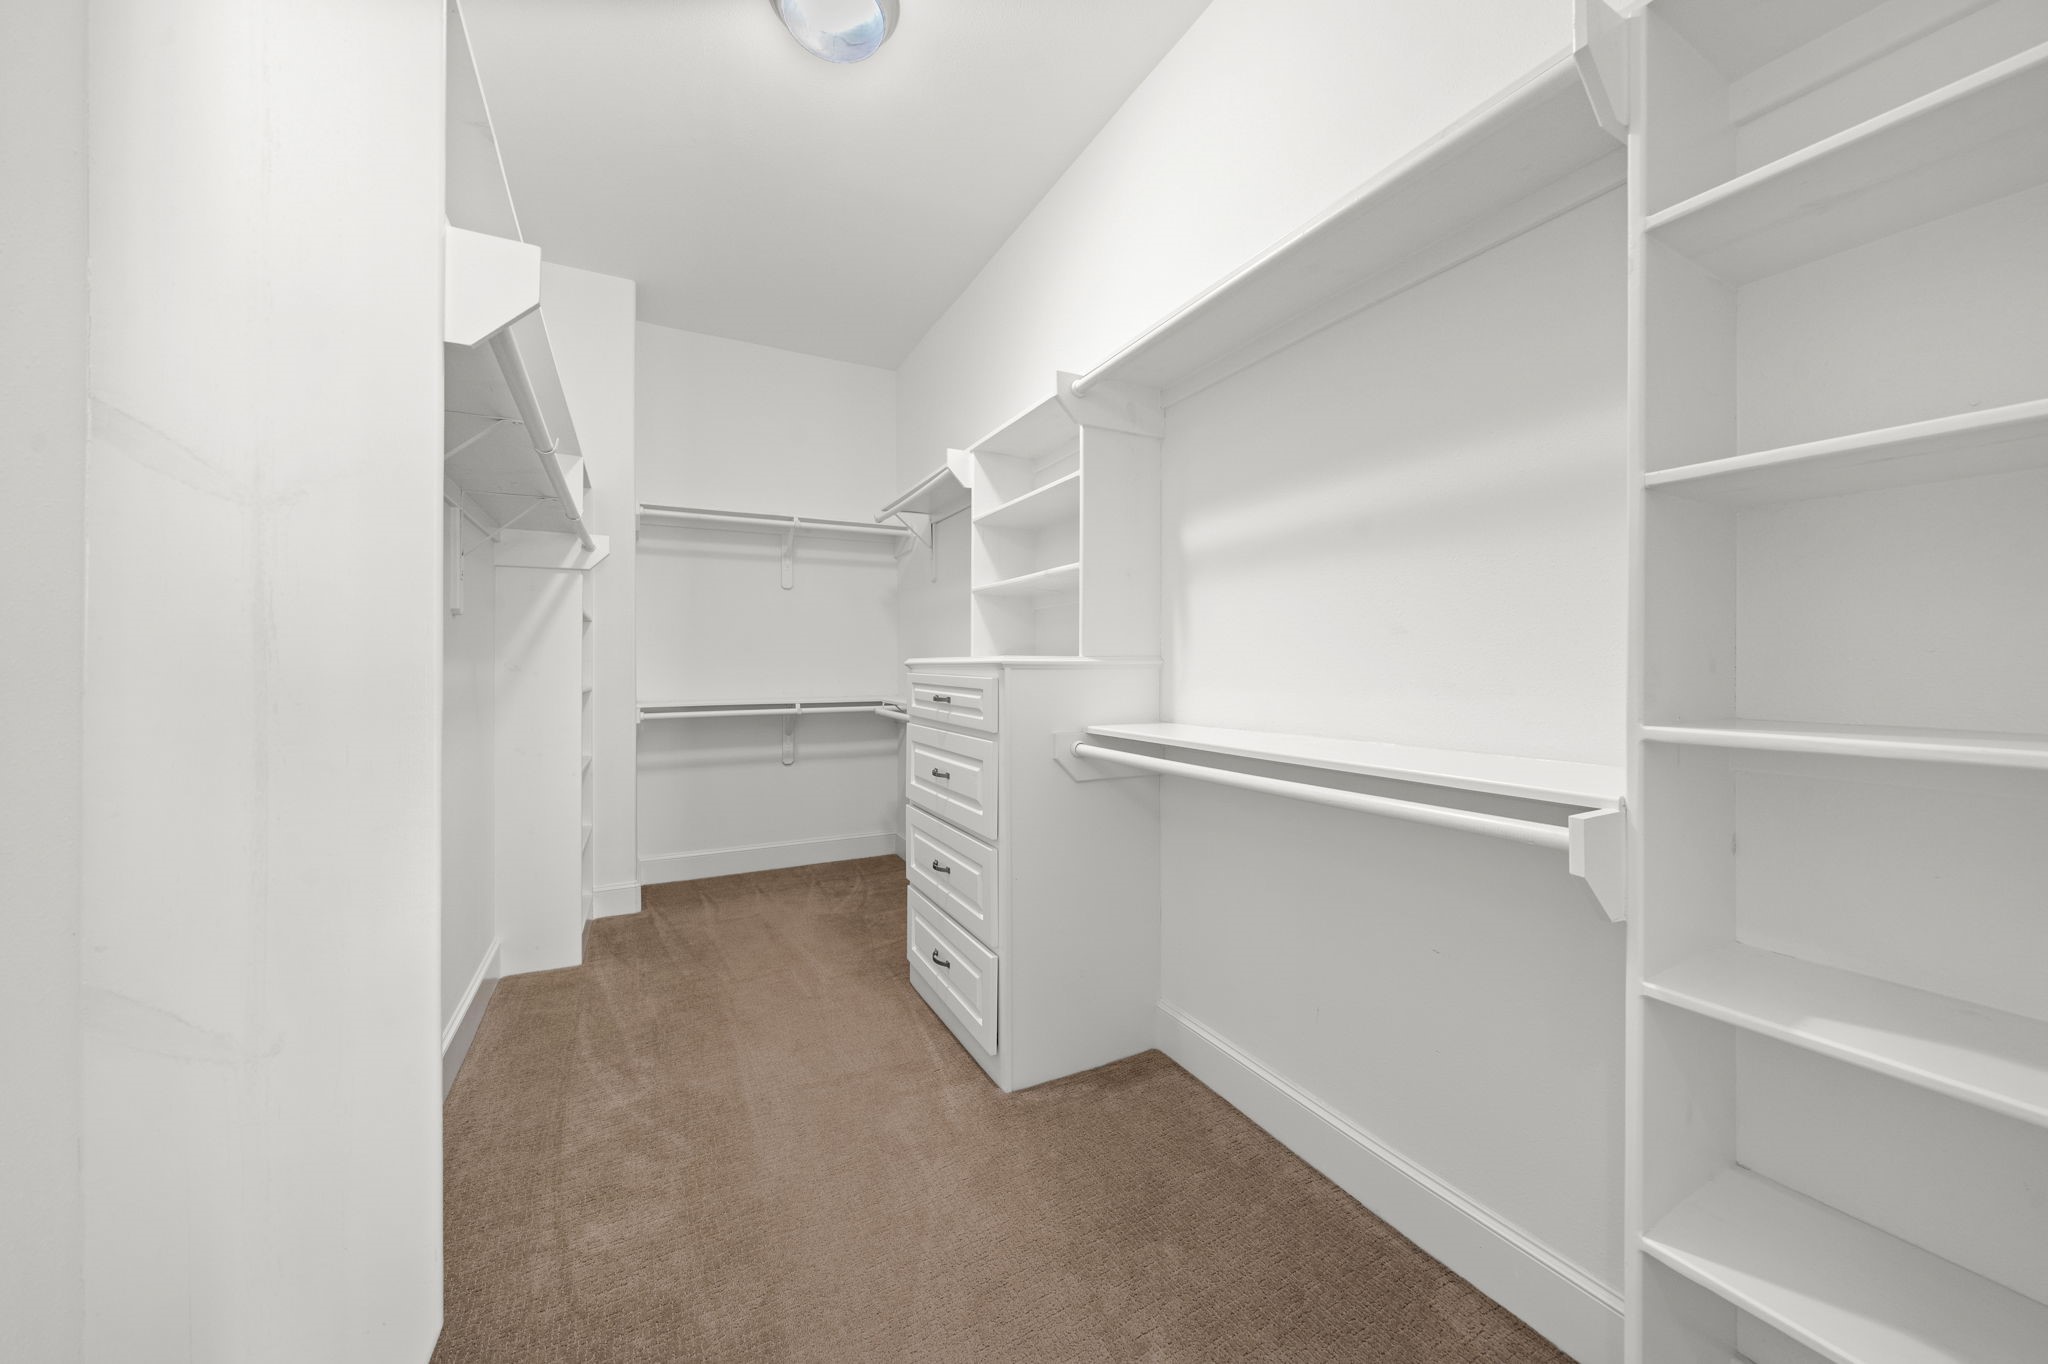 The primary suite's first walk-in closet features carpeted floors and abundant storage space with cabinets, shelving, and racks.